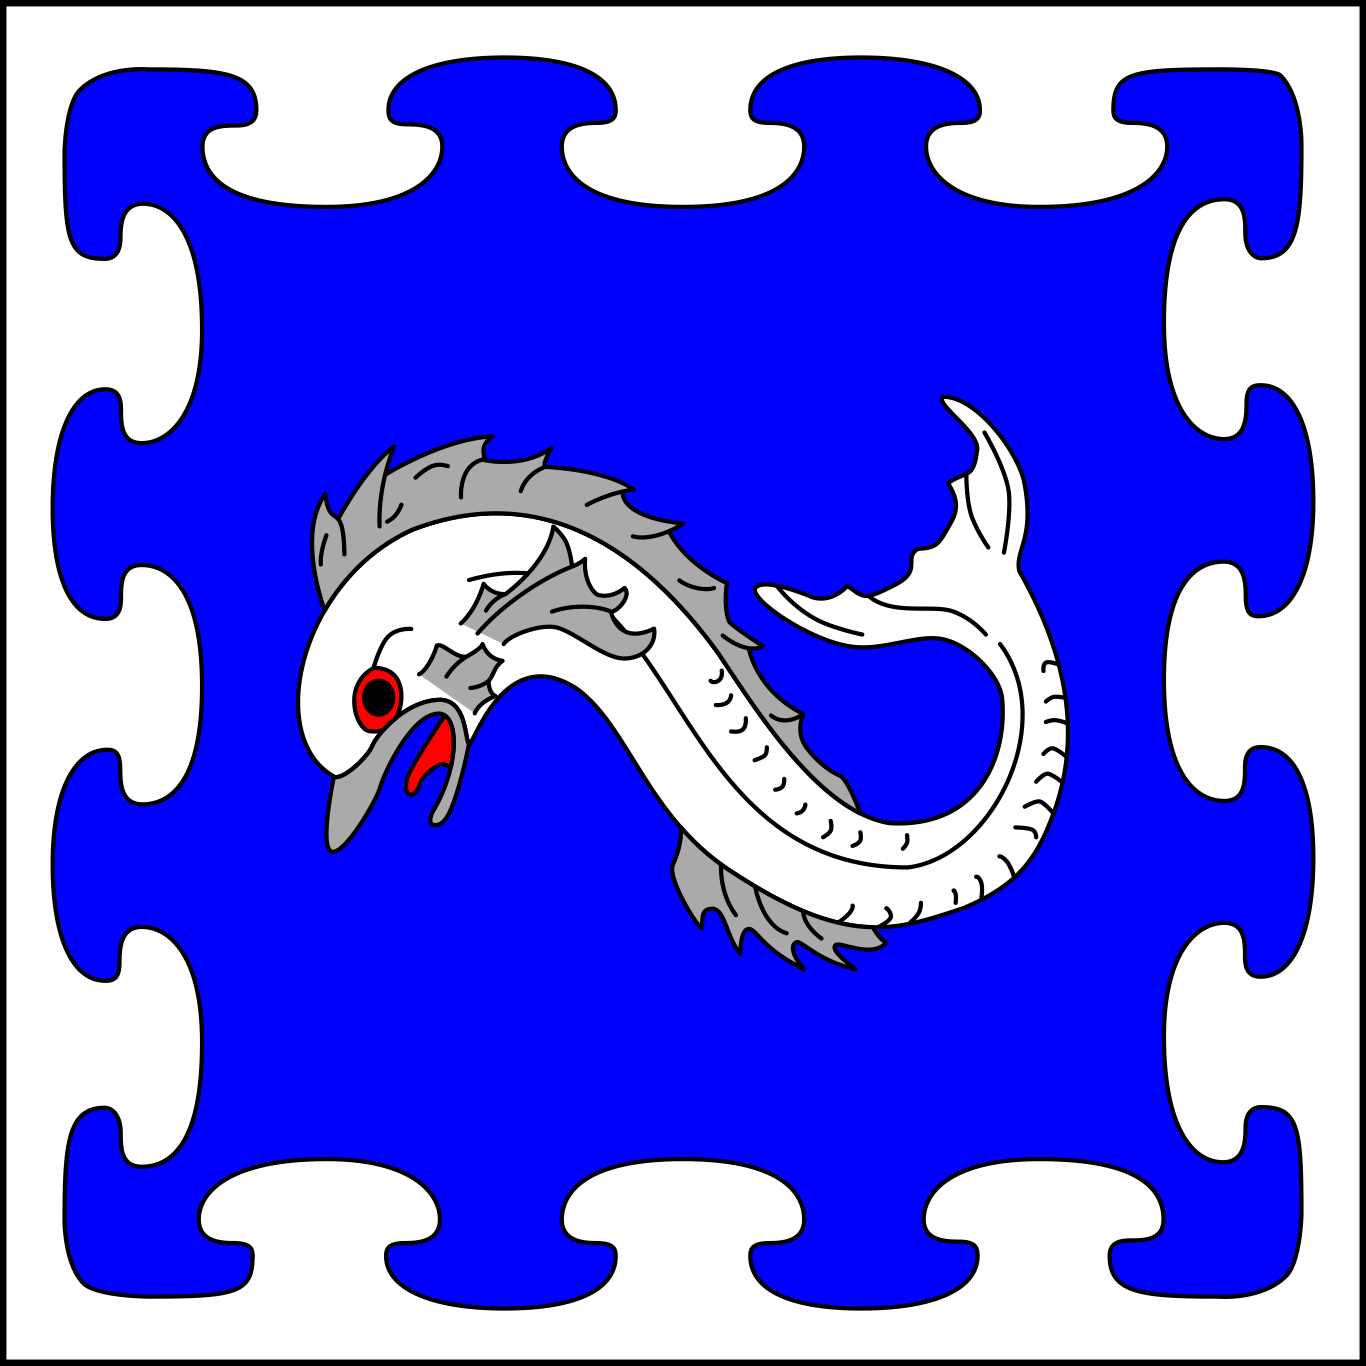 Azure, a dolphin and a bordure nebuly argent.